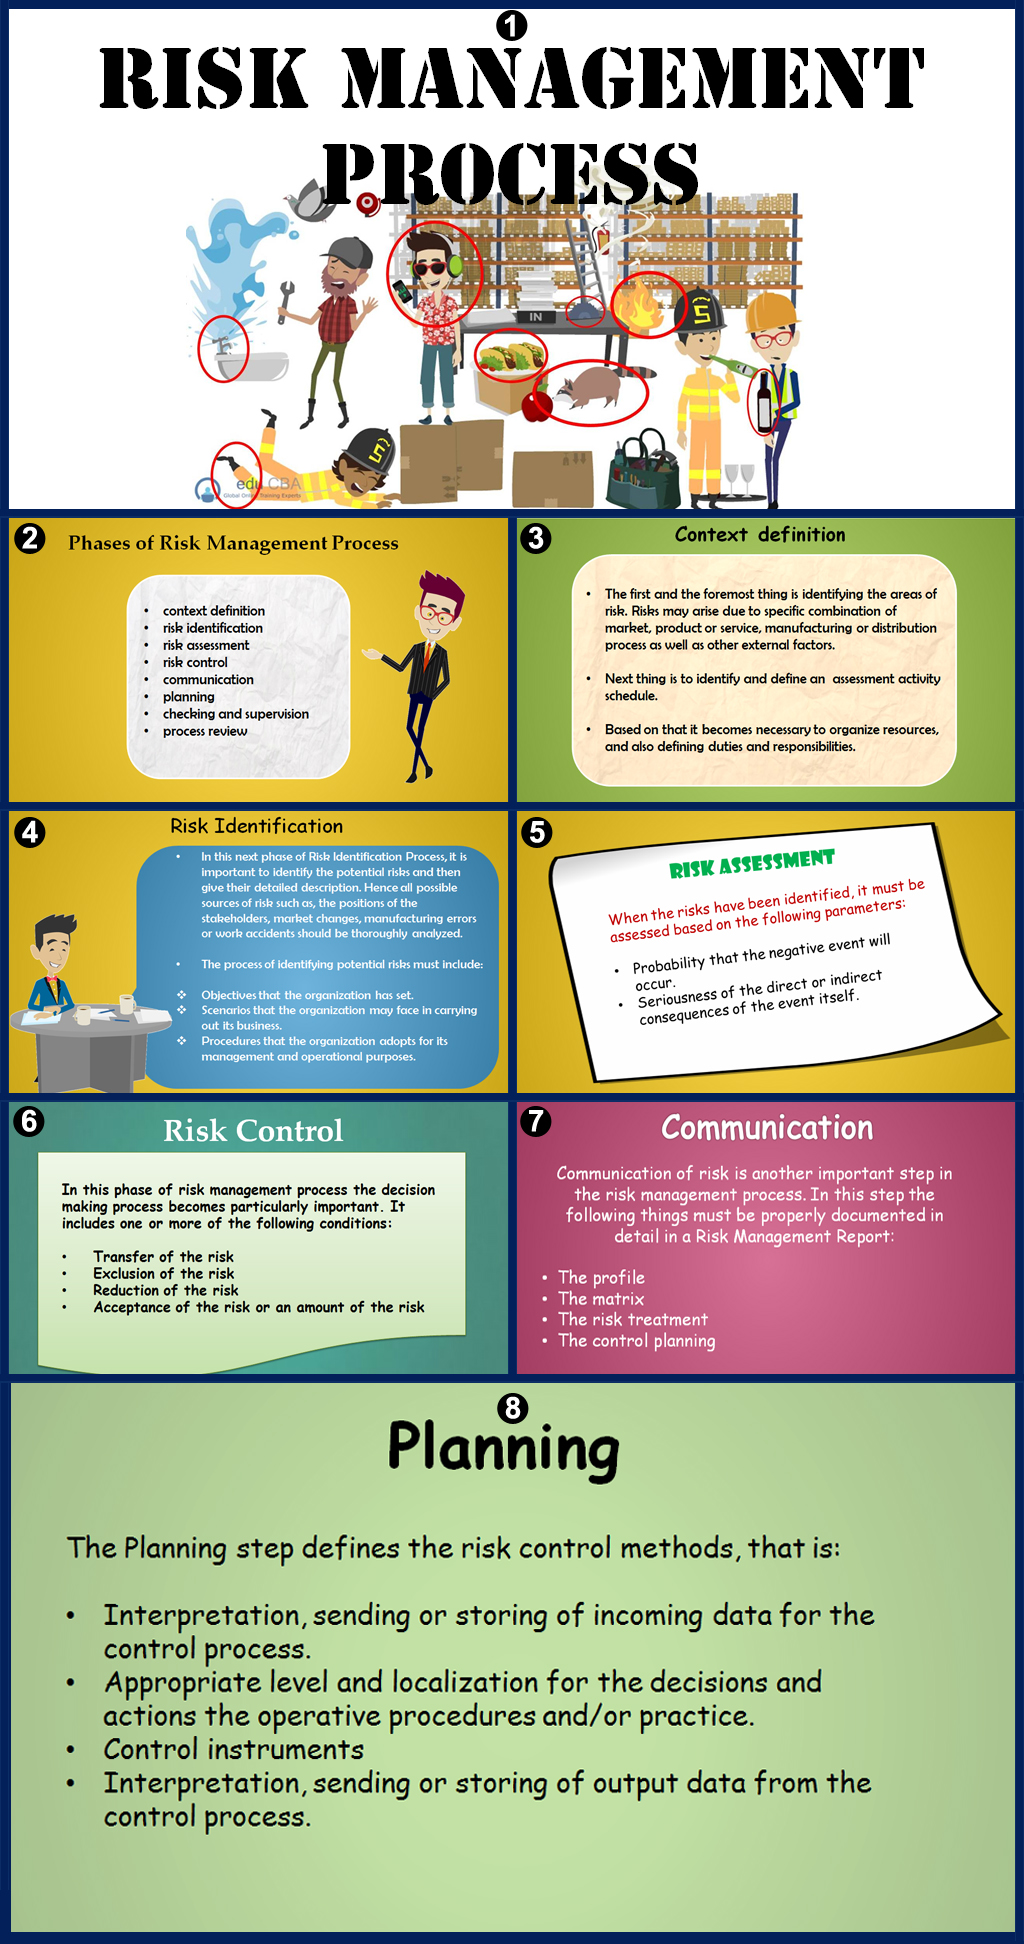 Risk Management Process and its phases | (Training,Strategies)